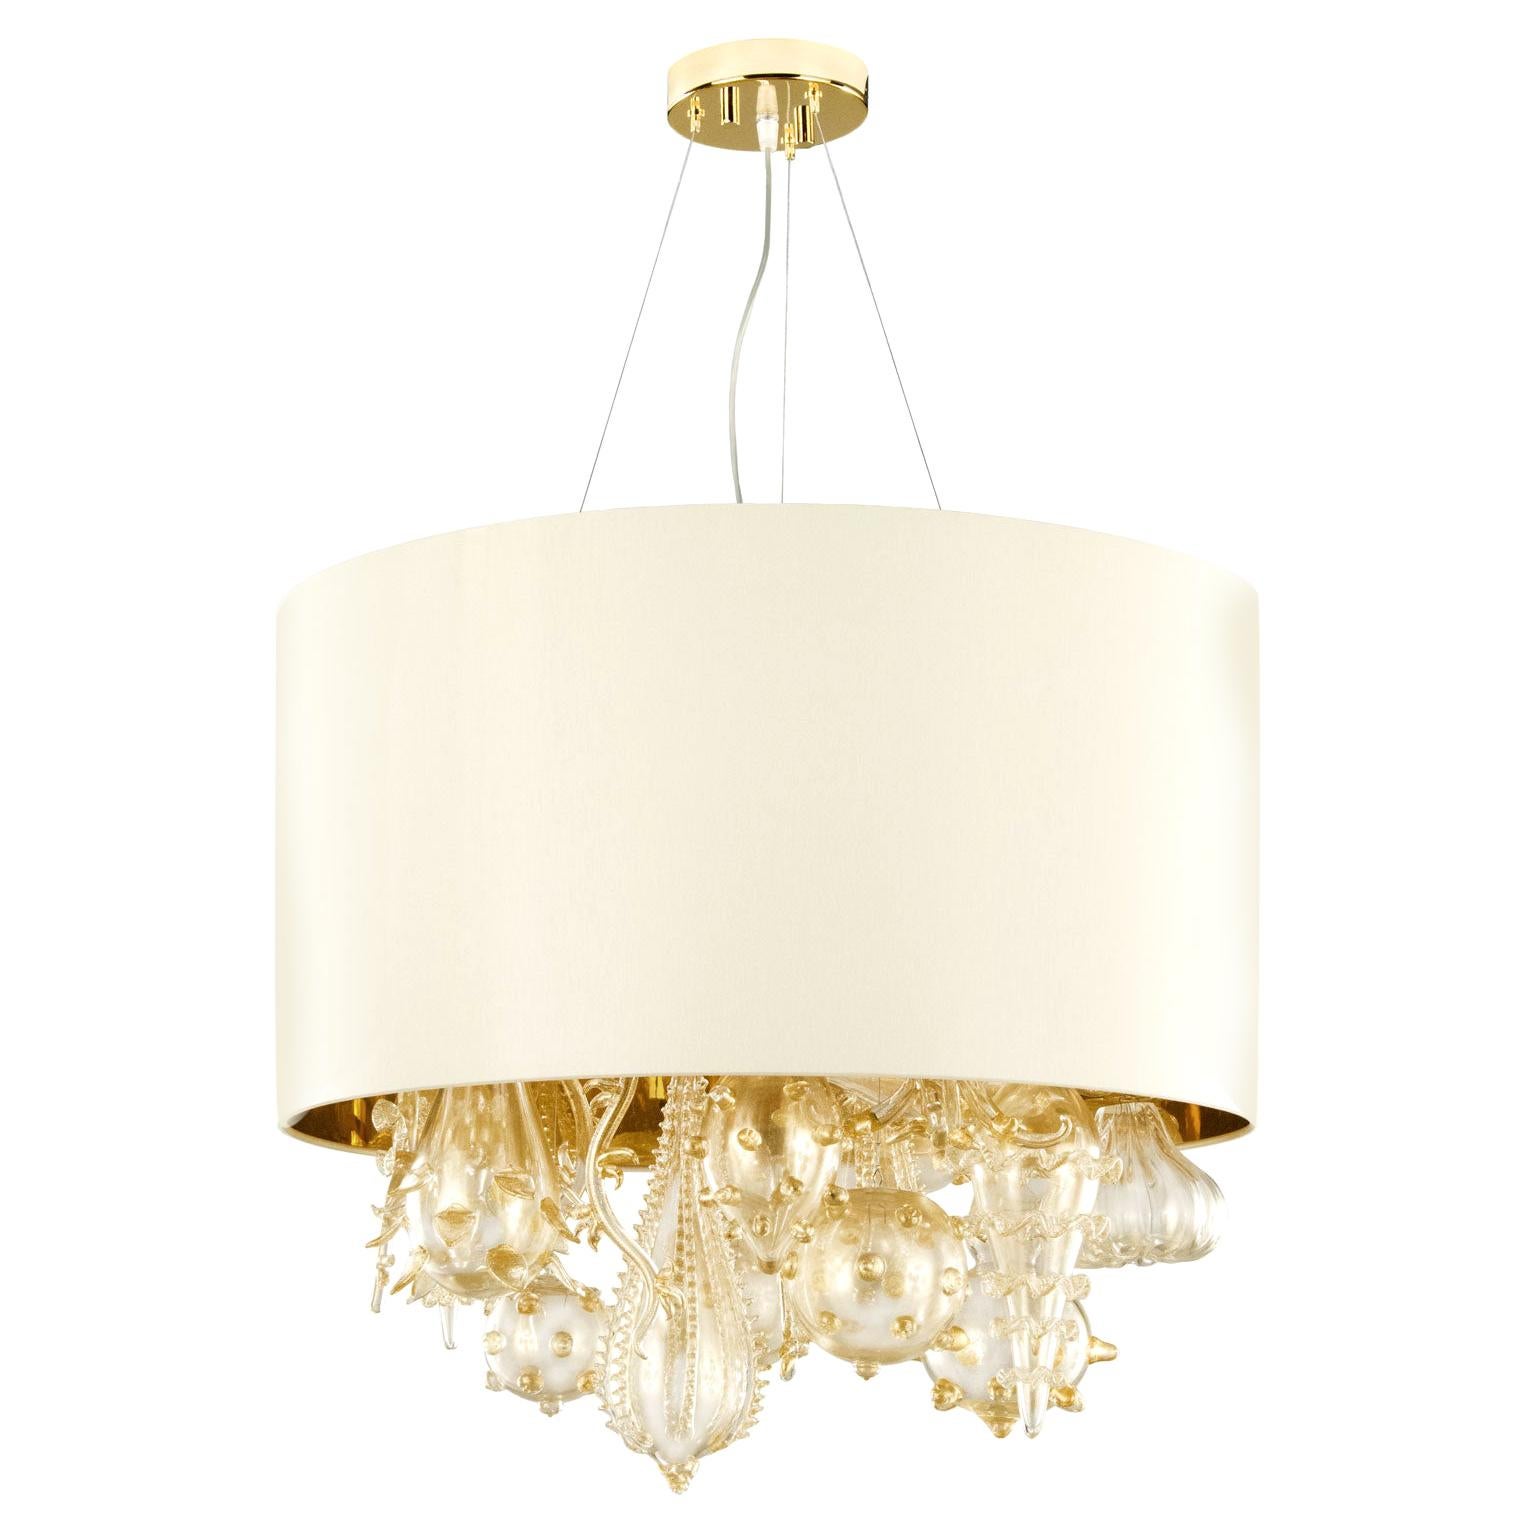 Artistic Suspension Lamp Gold leaf Glass elements, Ivory Lampshade by Multiforme